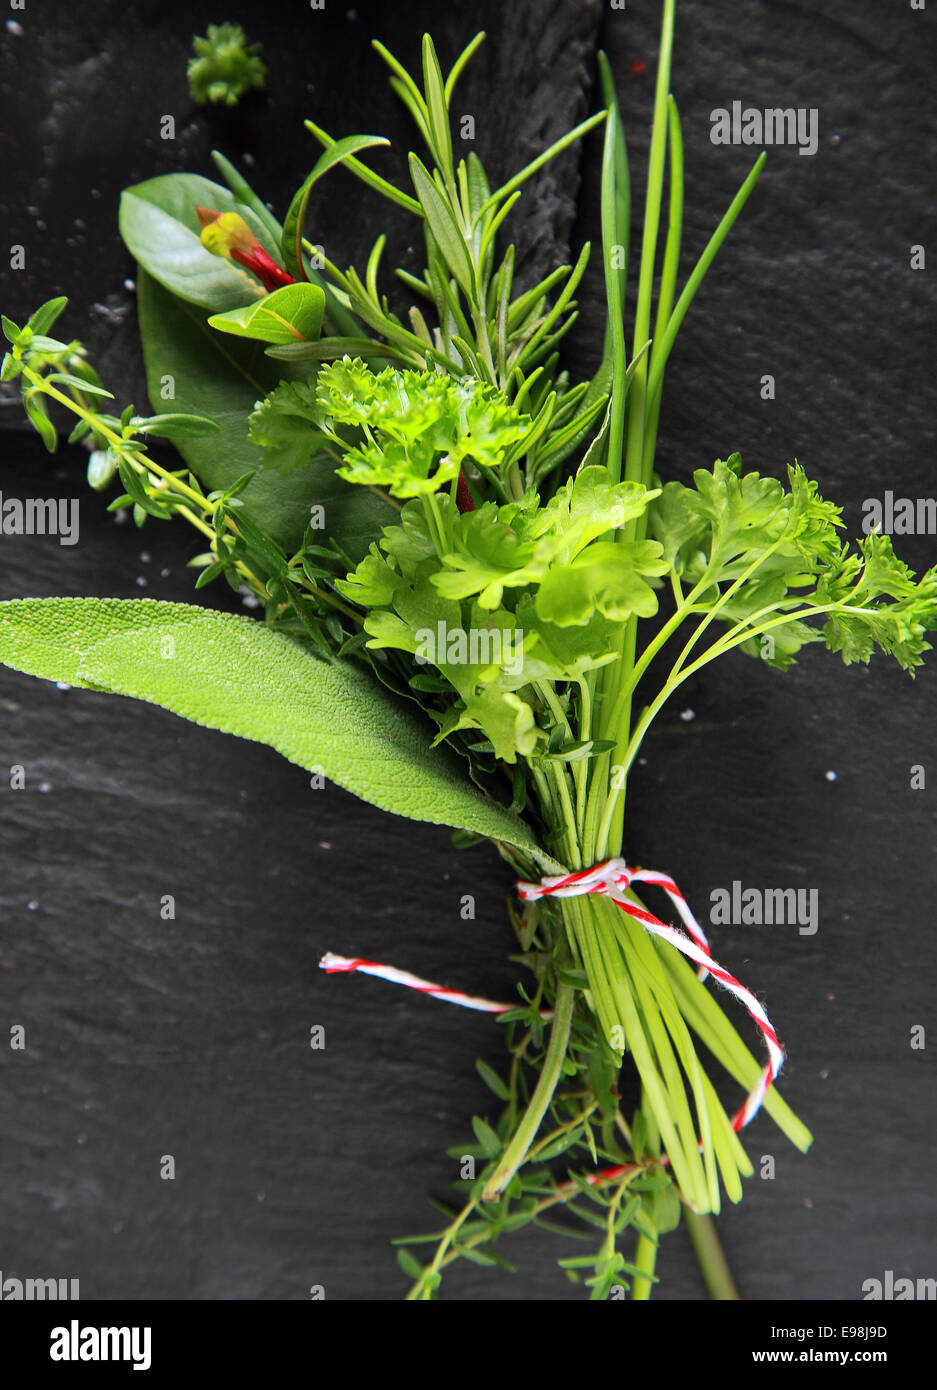 Bouquet garni of assorted fresh herbs tied in a bunch with chives, rosemary, parsley, oregano and coriander for use as an aromatic seasoning in cooking Stock Photo